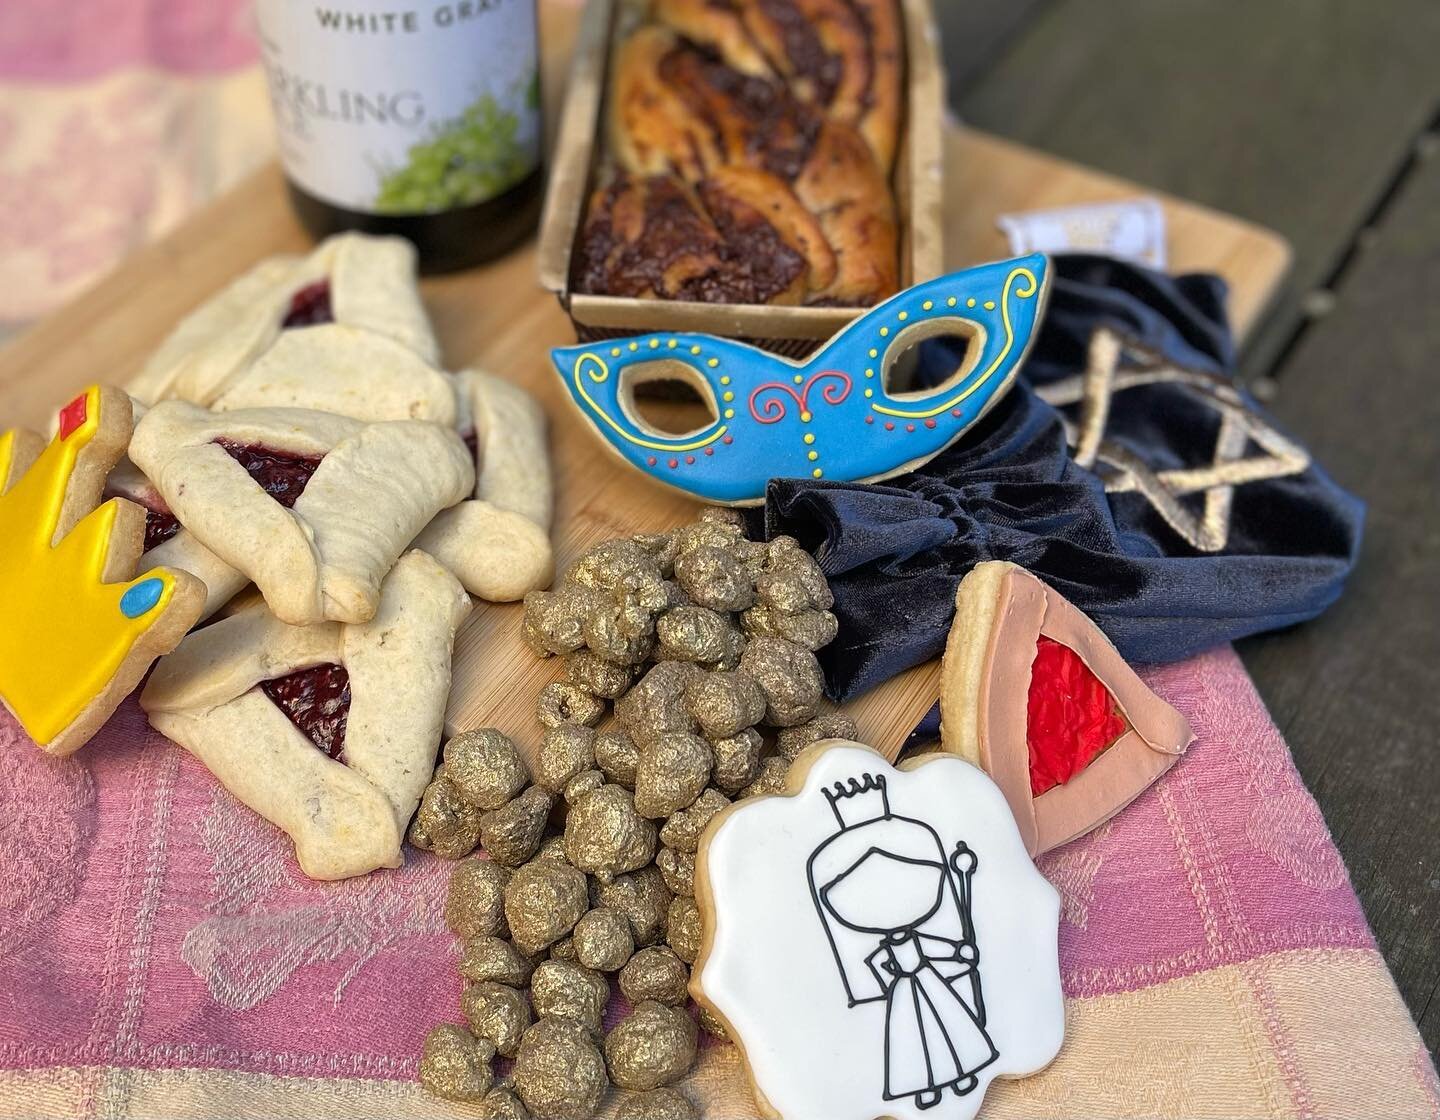 Giving (especially giving of food) is a very important tradition for Purim!  These Mishloach Manot baskets are the perfect way to send your love this holiday!

#purim #purim2023 #mishloachmanot #cookiesofinstagram #cookies #foodporn #corporategifts #